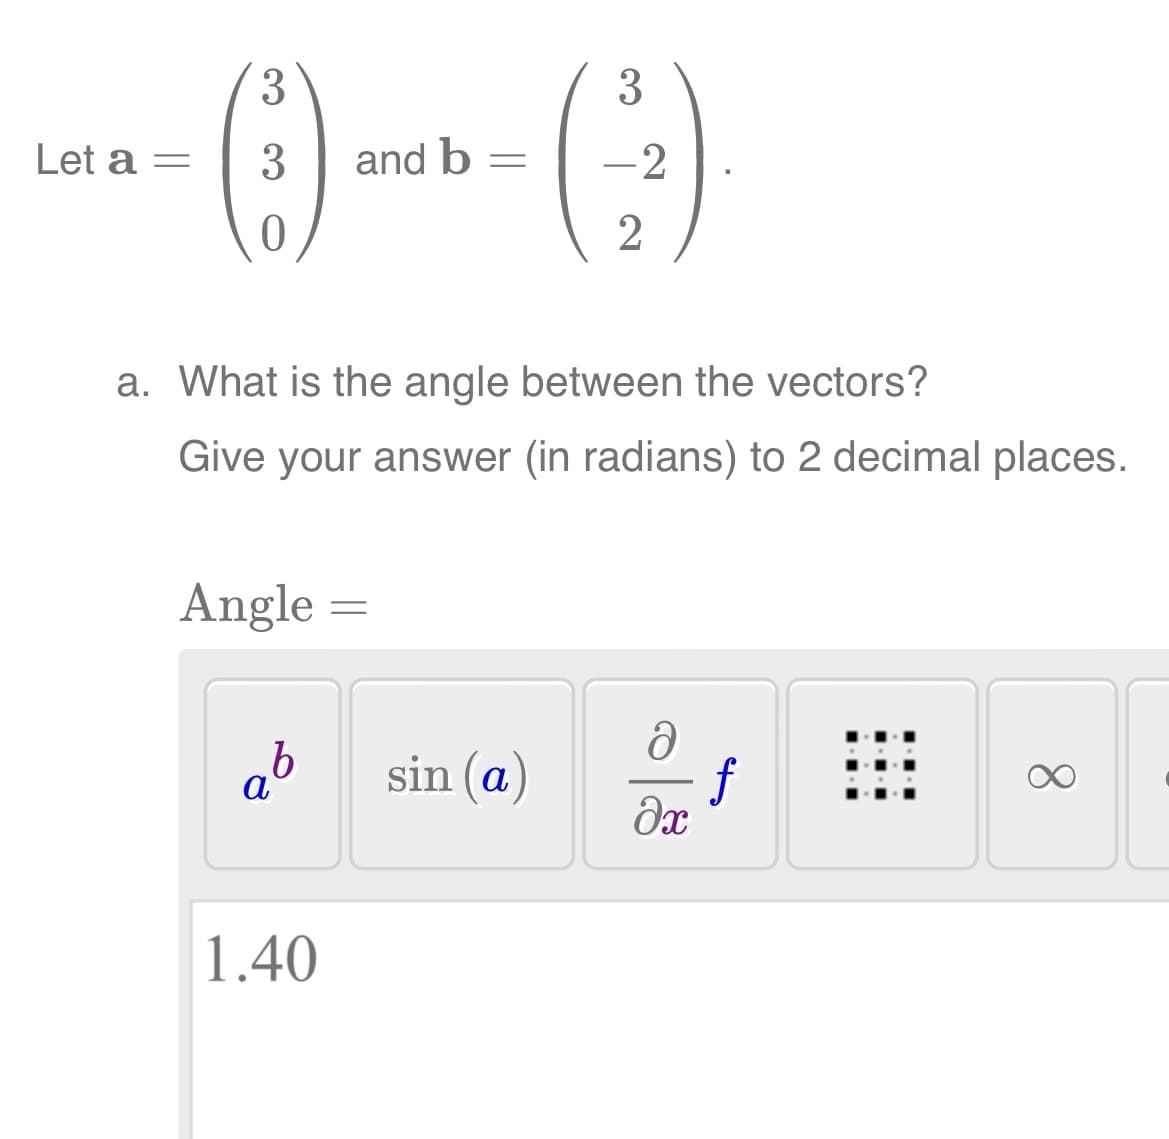 Let a =
3
3
0
Angle
b
a
and b =
a. What is the angle between the vectors?
Give your answer (in radians) to 2 decimal places.
1.40
=
3
sin (a)
-2
2
Ə
əx
8